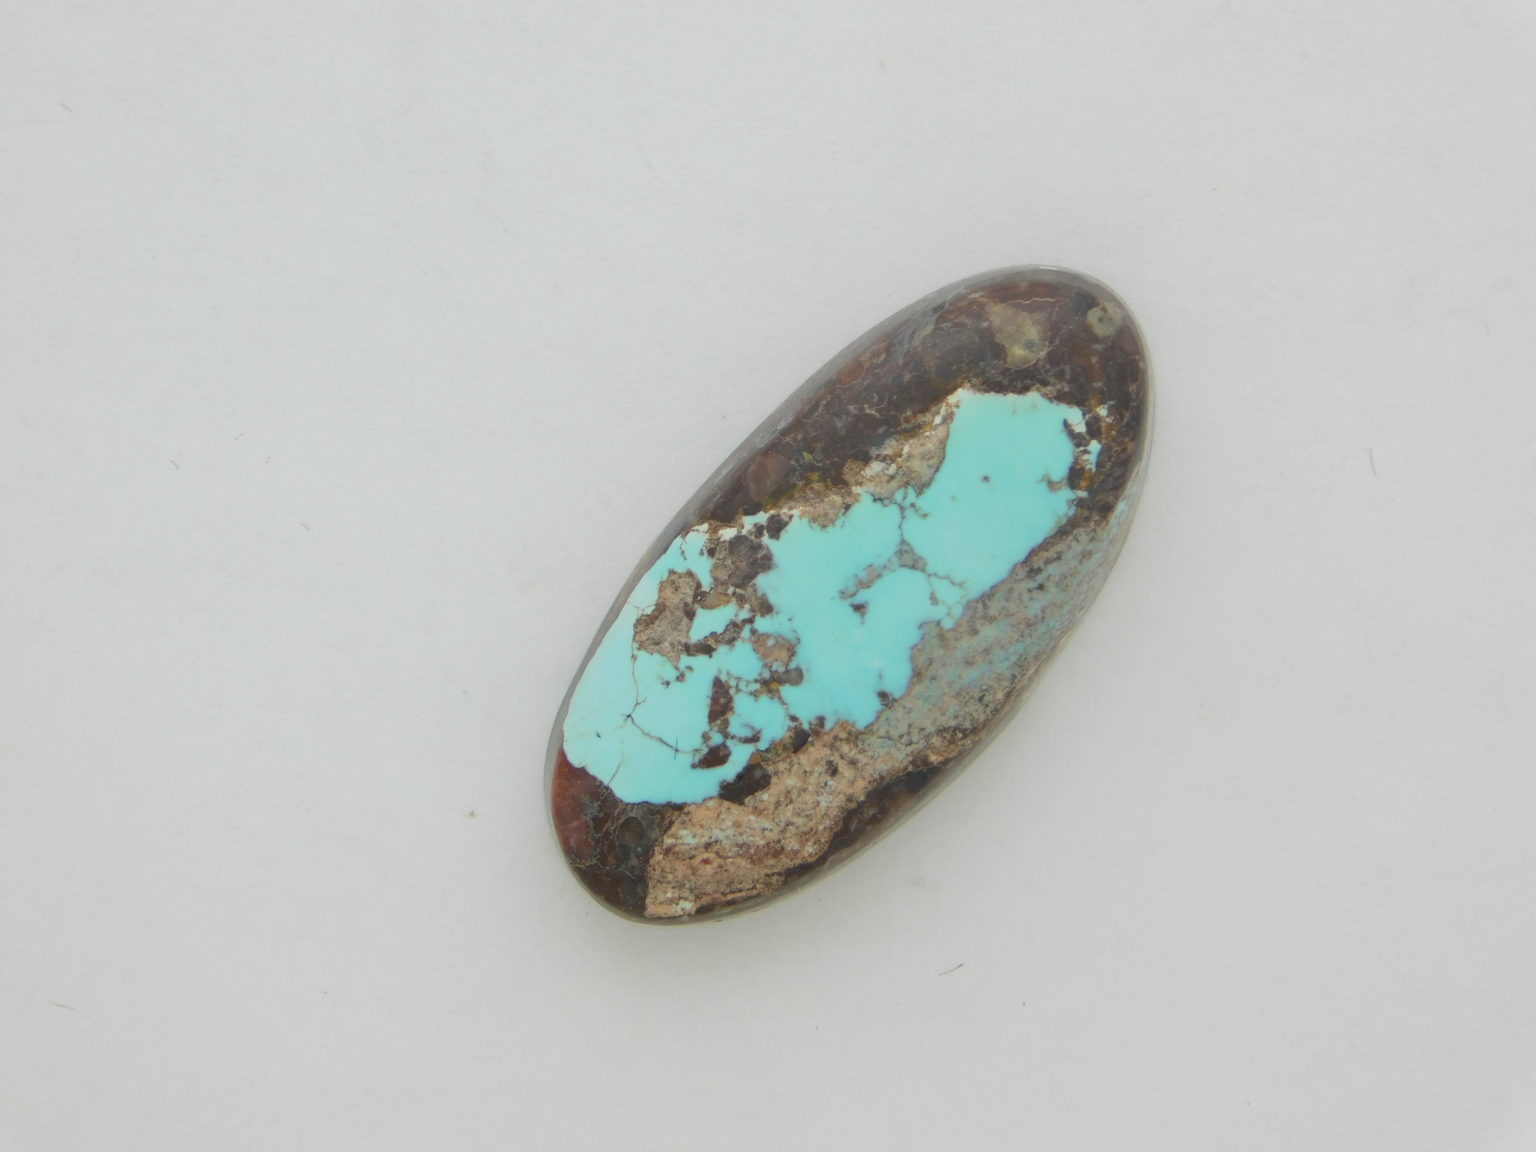 Bisbee Turquoise Cabochon 19 cts.